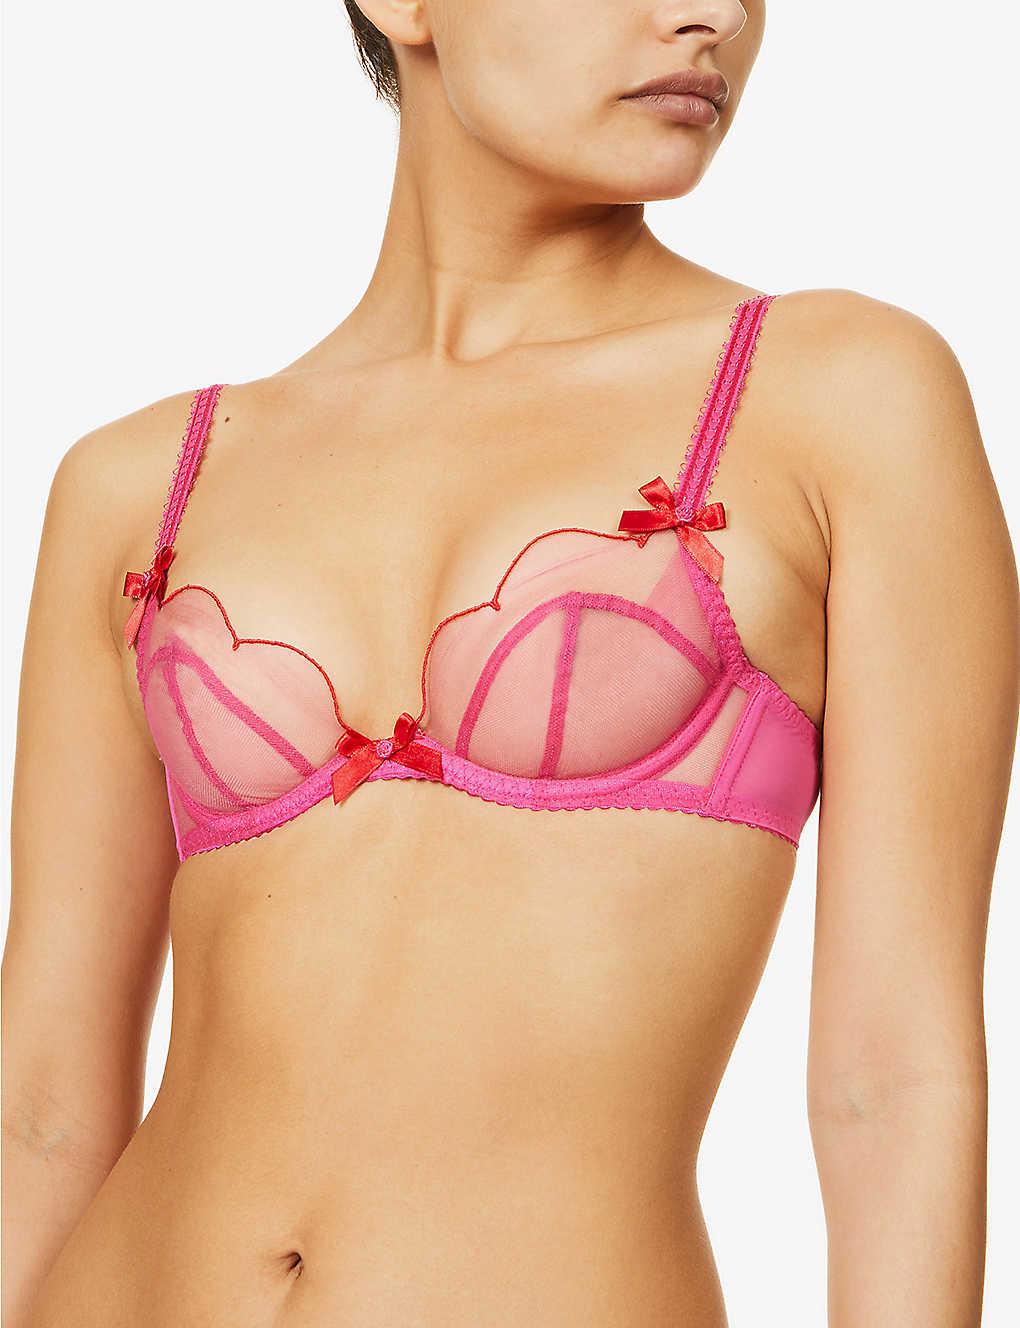 Lorna Bra various sizes Agent Provocateur red pink BNWT